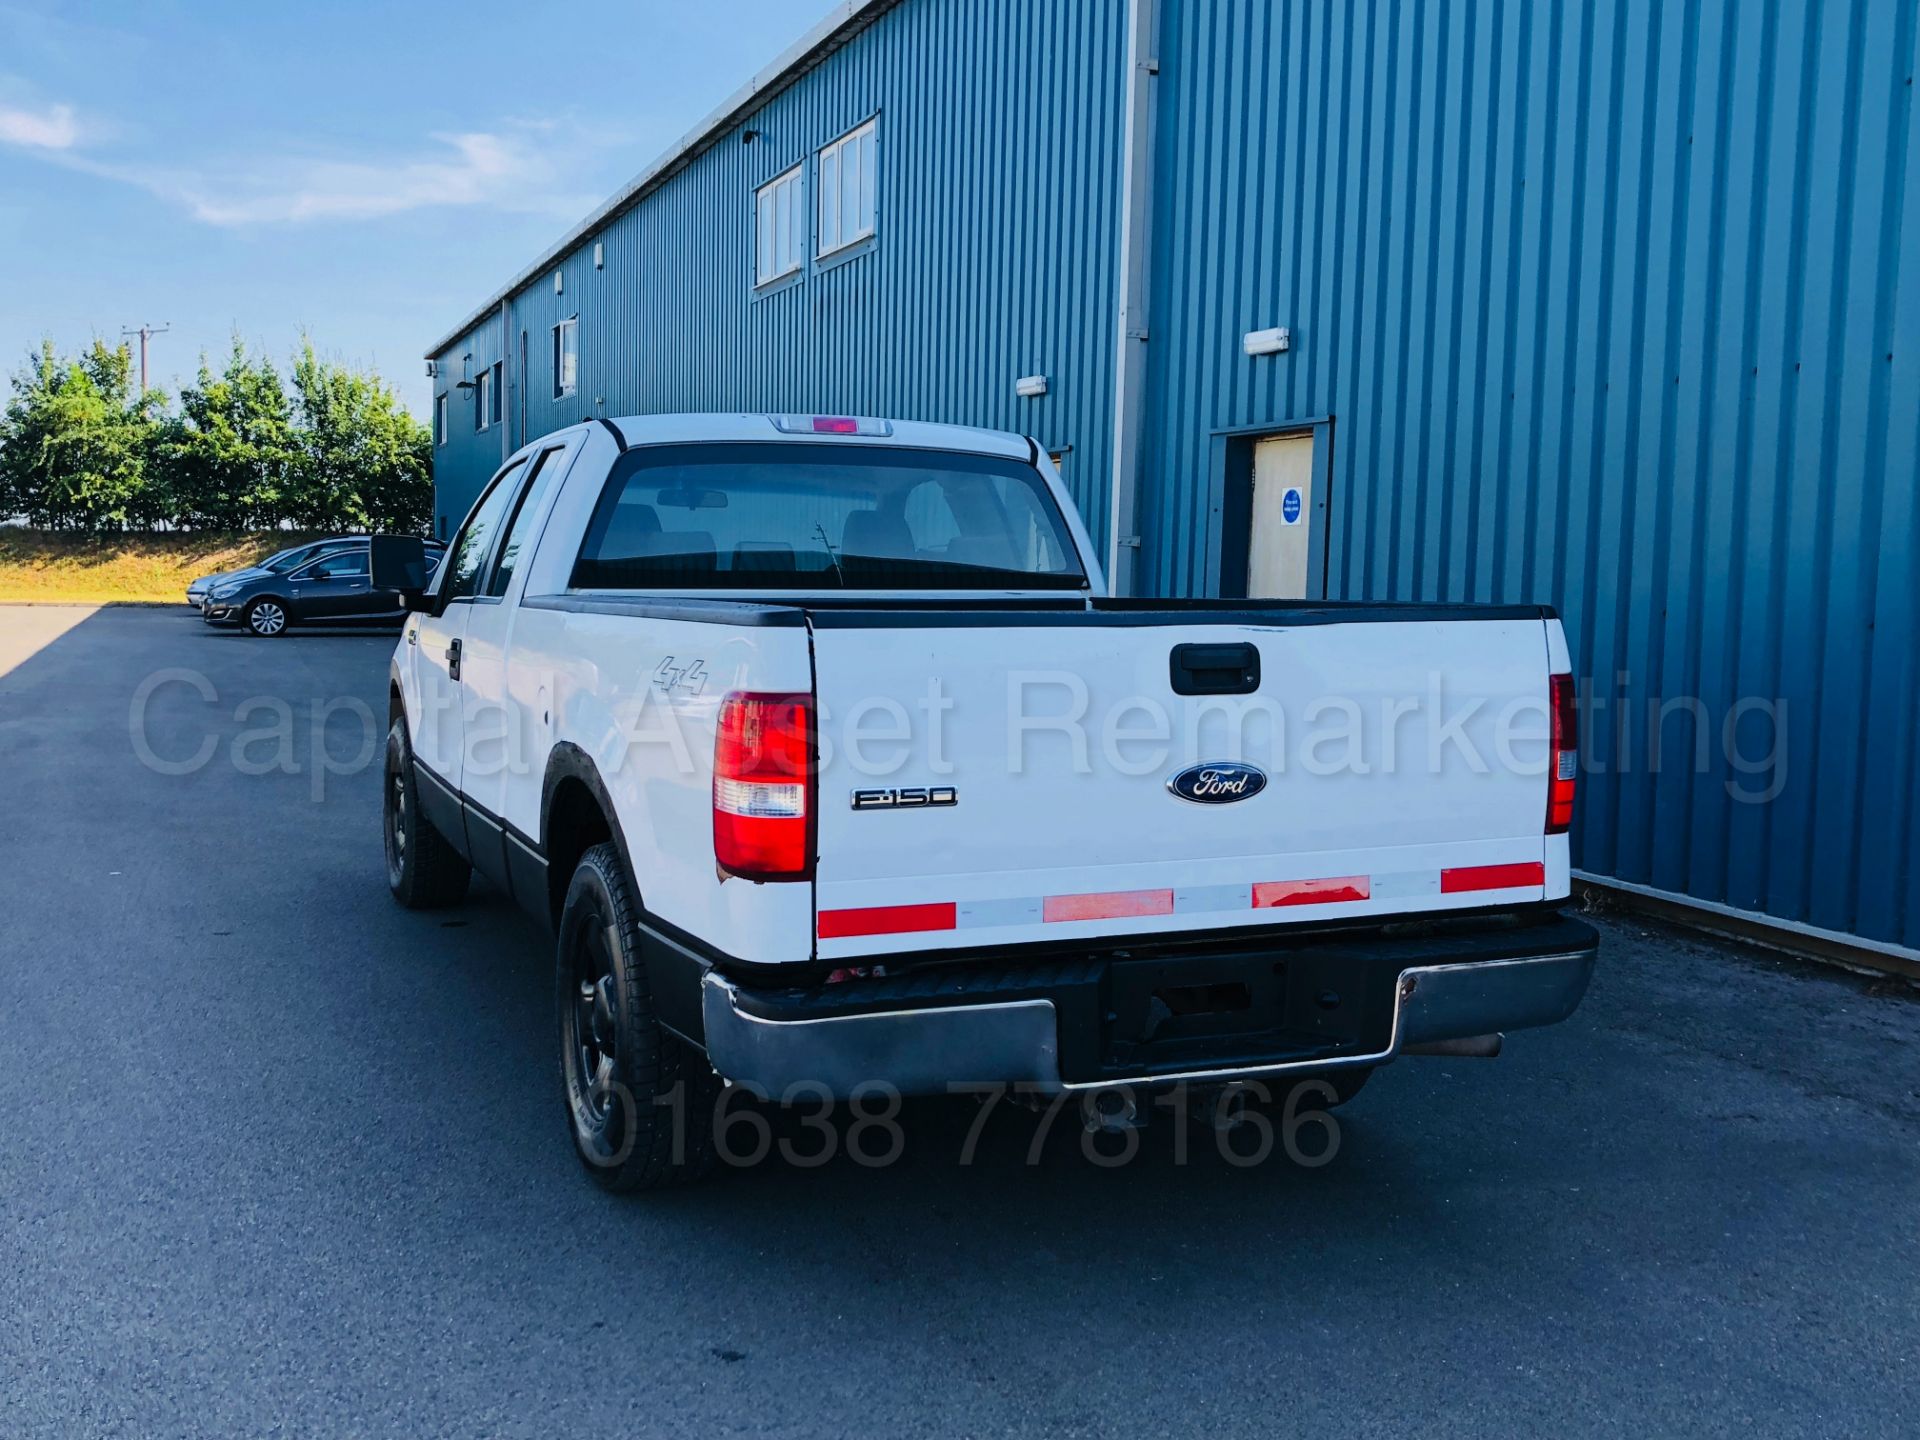 (On Sale) FORD F-150 5.4 TRITON V8 XL EDITION KING-CAB 2008 YEAR**4X4**AUTOMATIC**6 SEATS* - Image 11 of 26